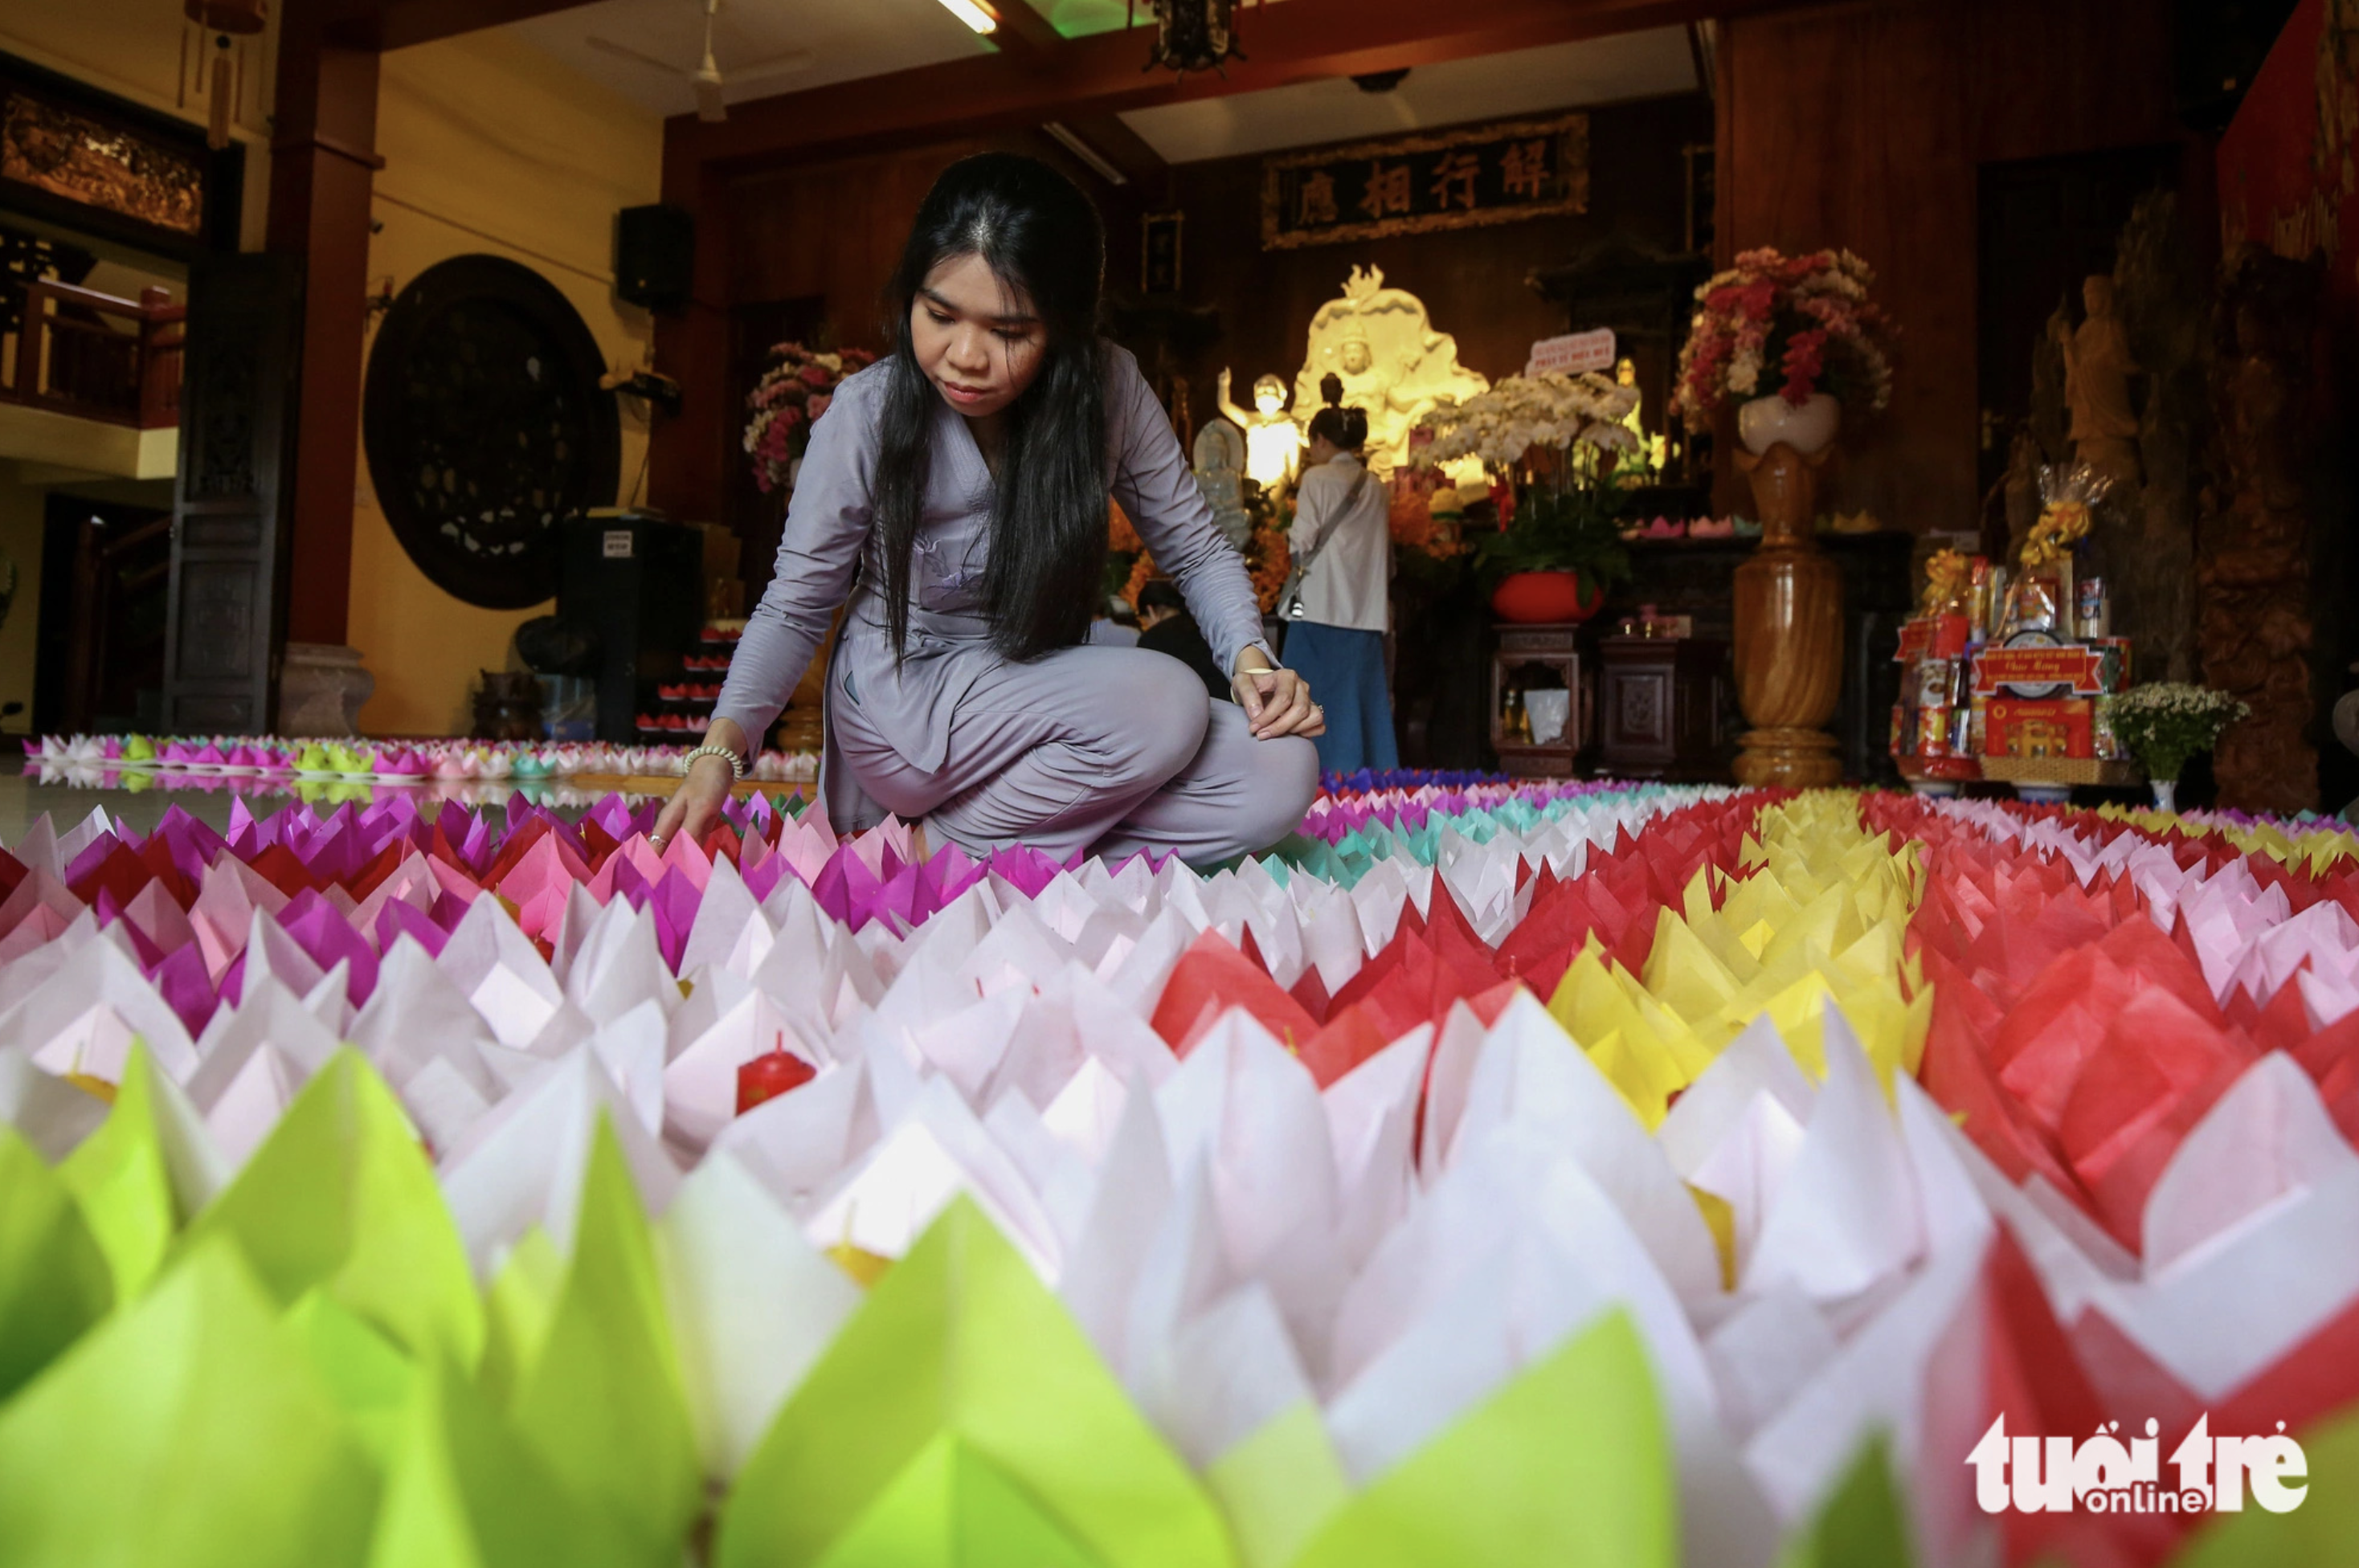 To treat residents and Buddhist followers to a lantern release ceremony on Buddha’s Birthday, Phap Hoa Pagoda will offer some 10,000 water lanterns. Photo: Phuong Quyen / Tuoi Tre